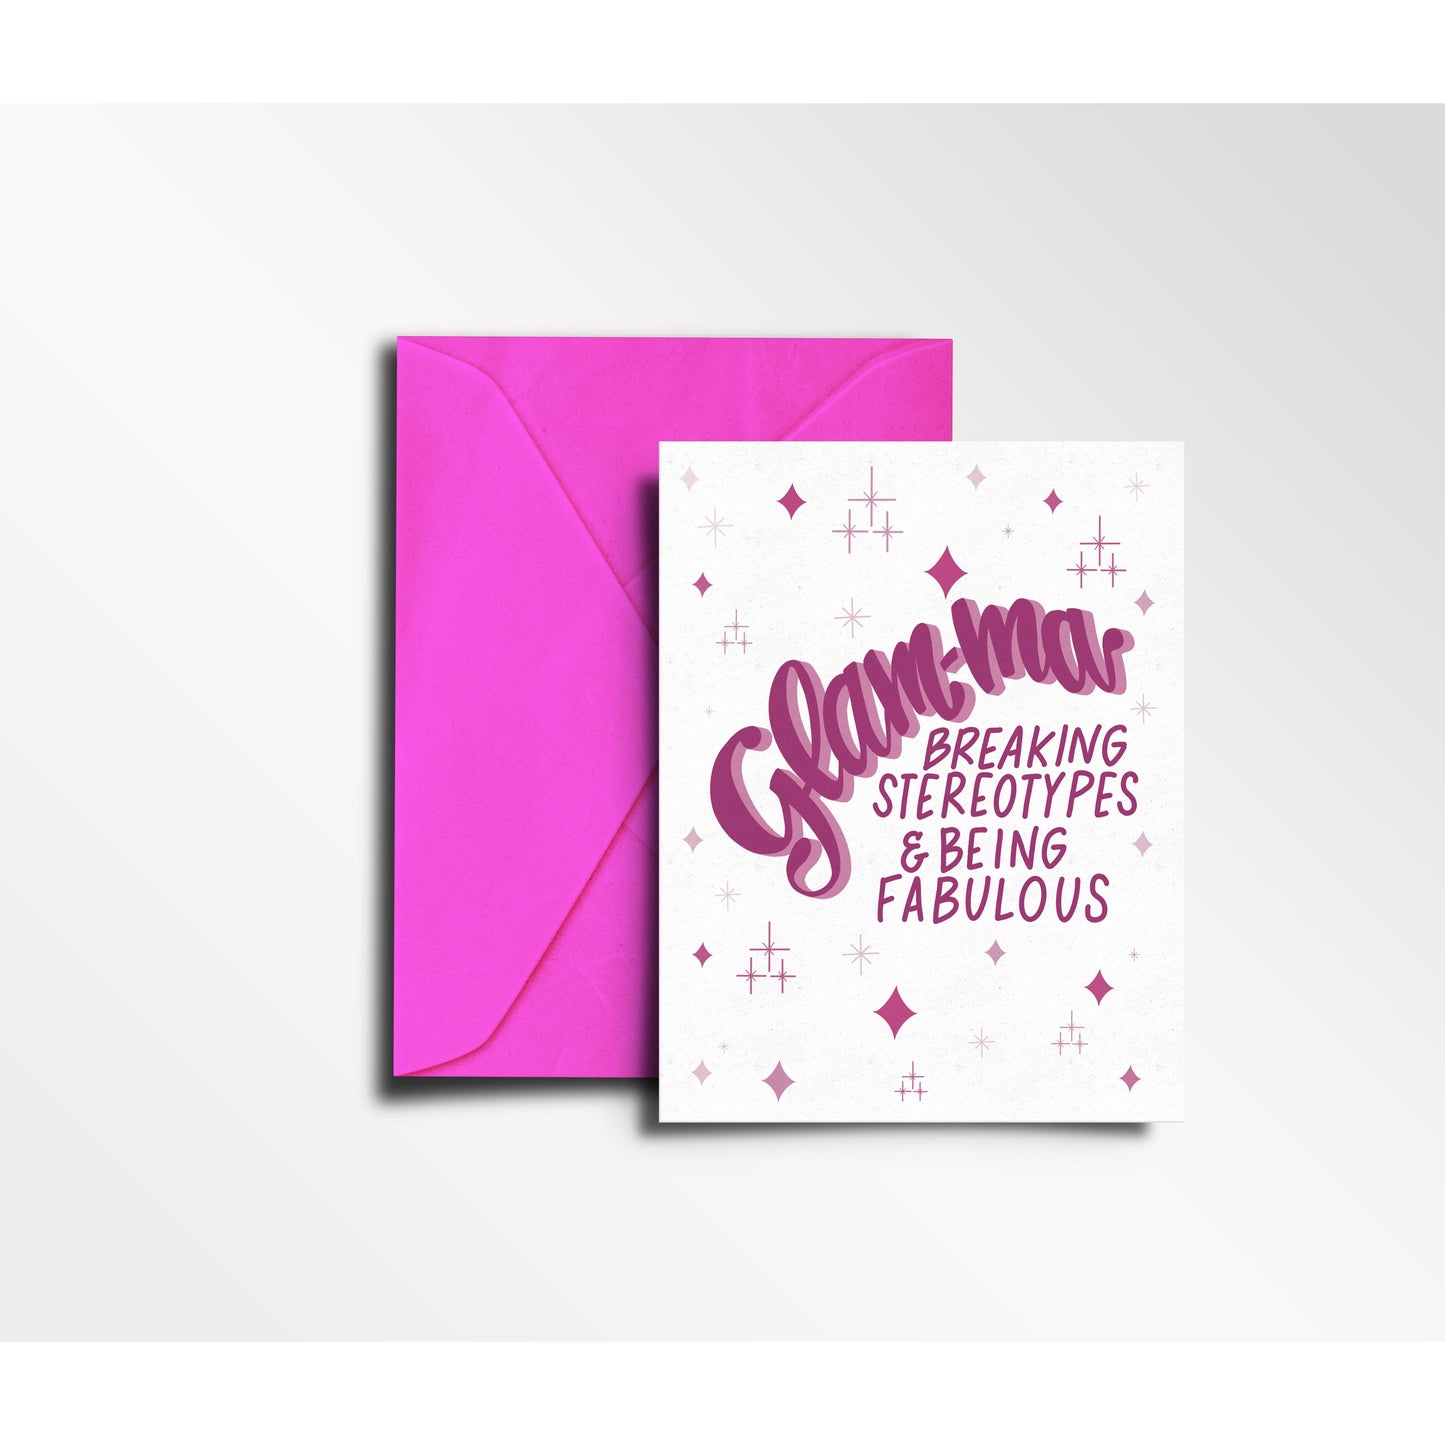 Glam-ma - Breaking Stereotypes & Being Fabulous - Mother's Day Card | Grandma only better